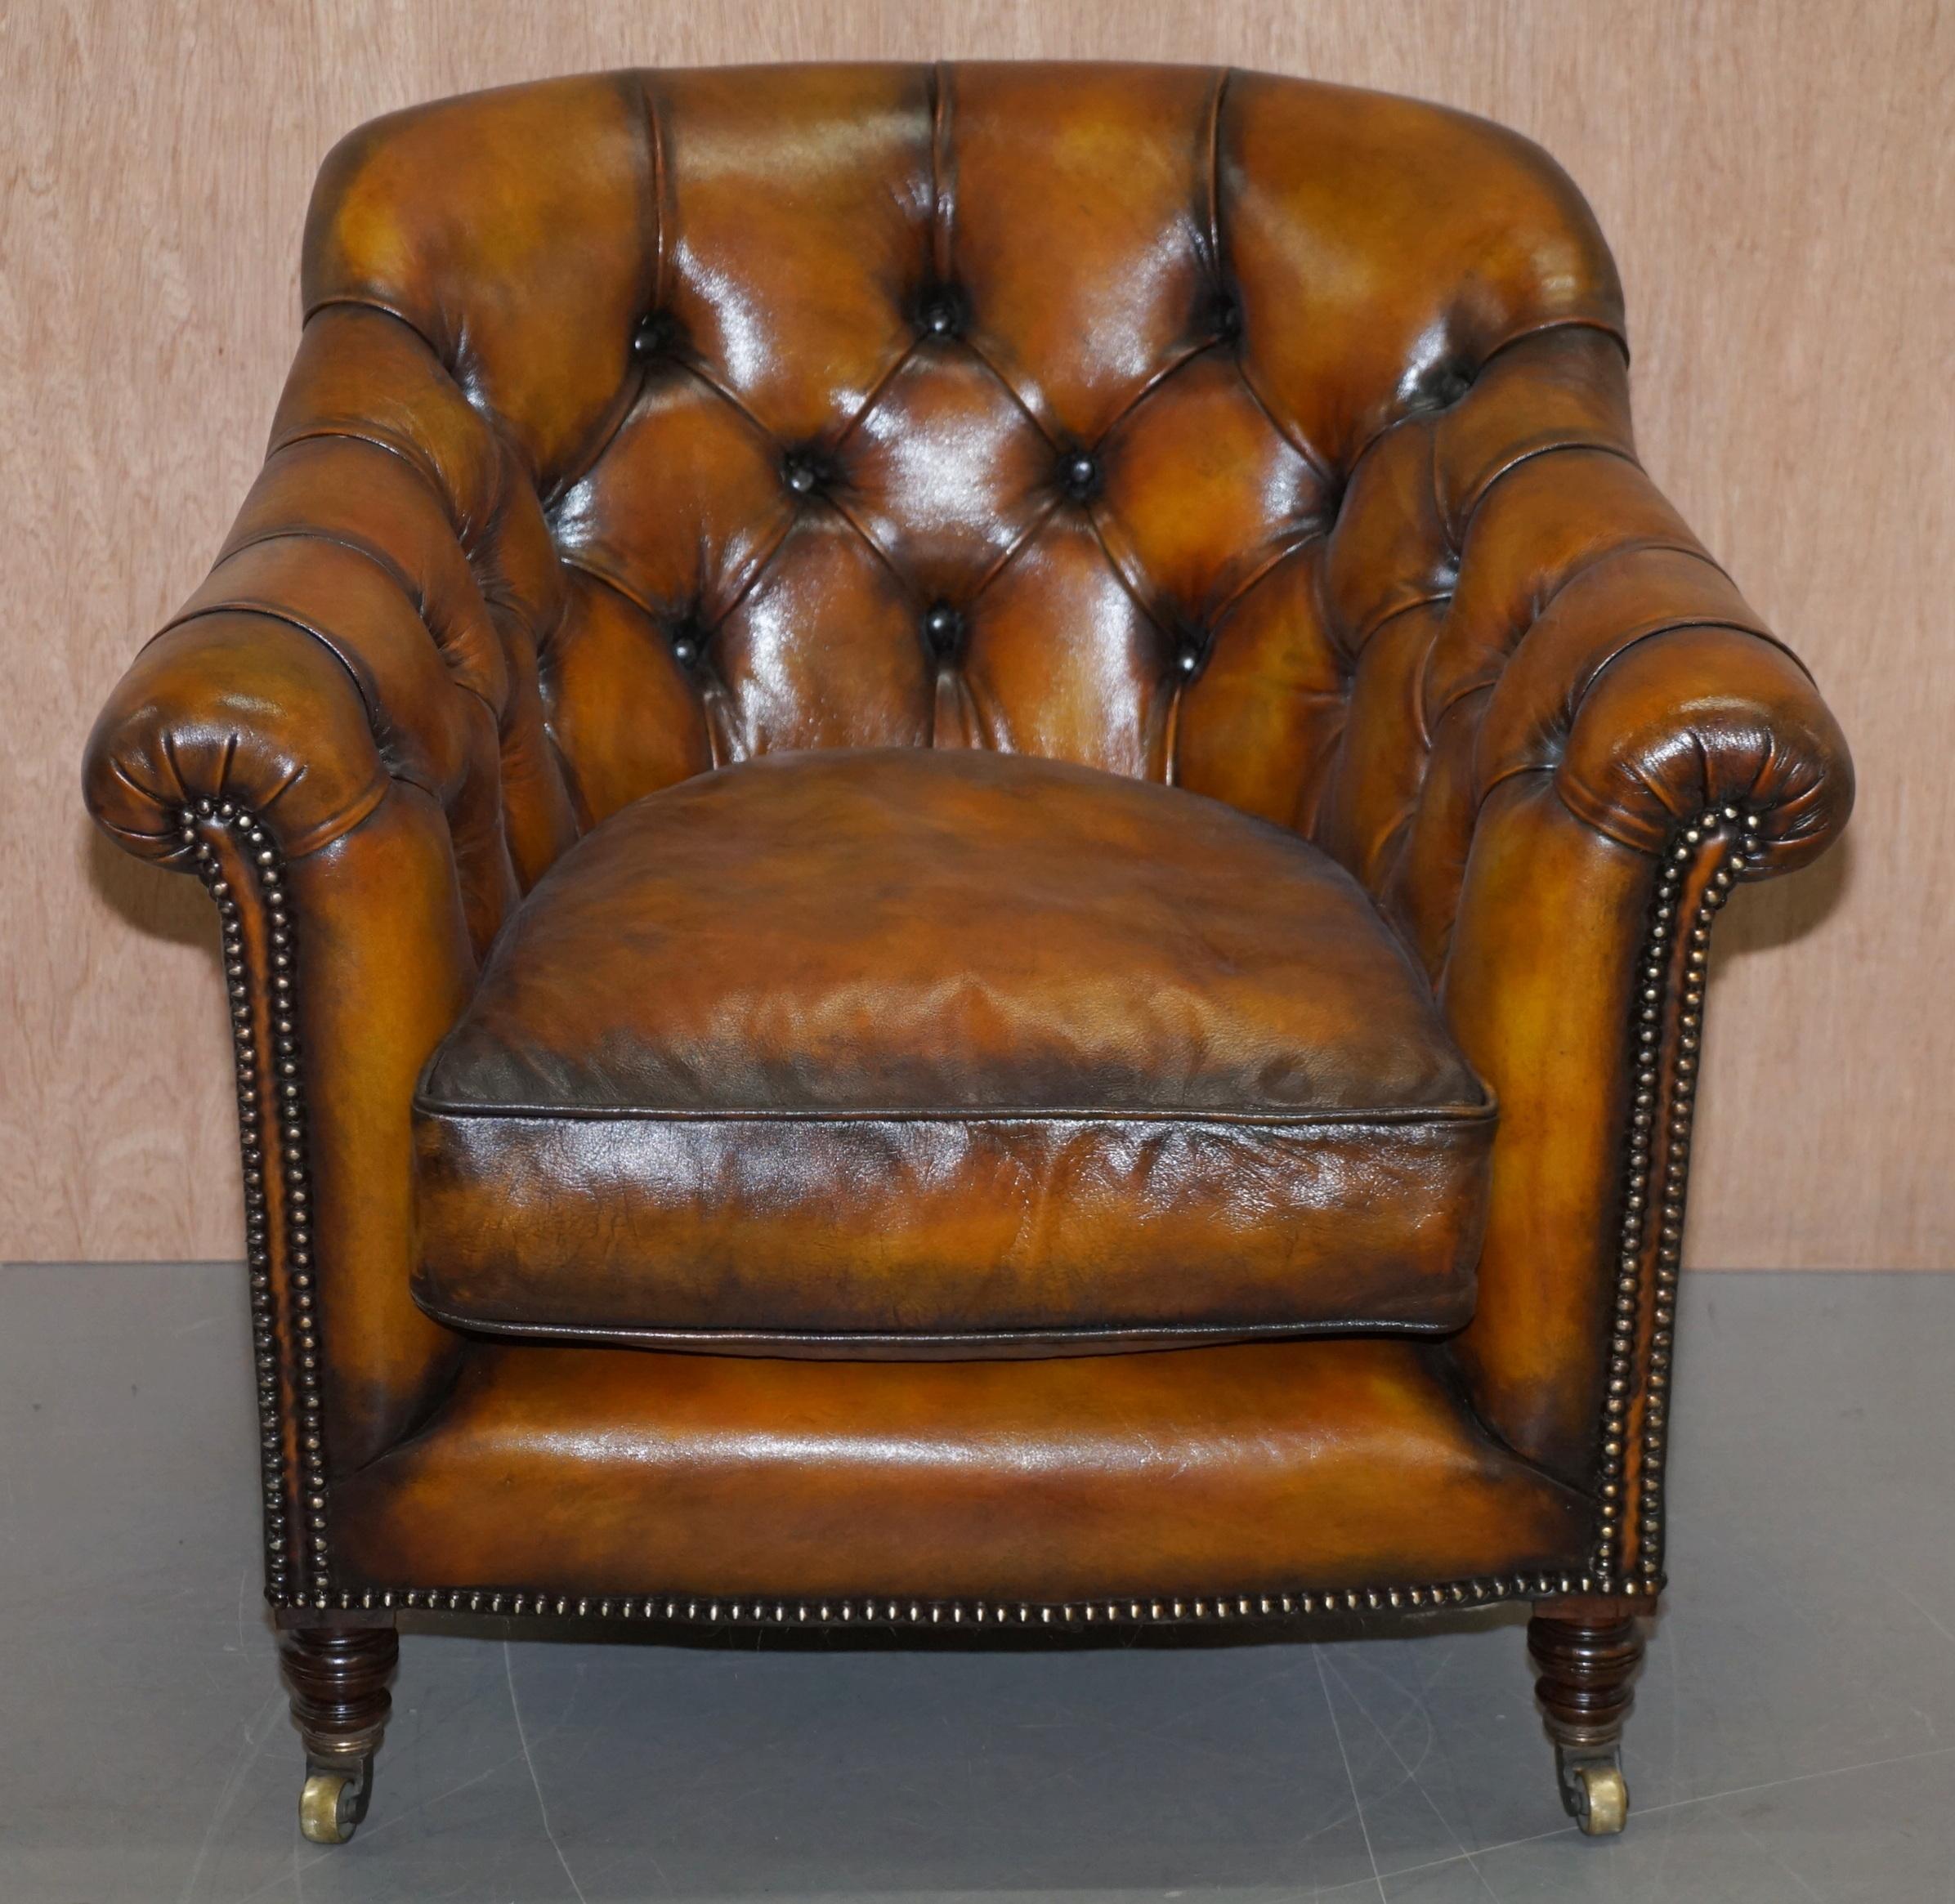 We are delighted to offer for sale this very rare original Howard and Sons stamped with original castors Victorian fully restored hand dyed brown leather club armchair

Never again will you see such a fine period example, the inside back leg is